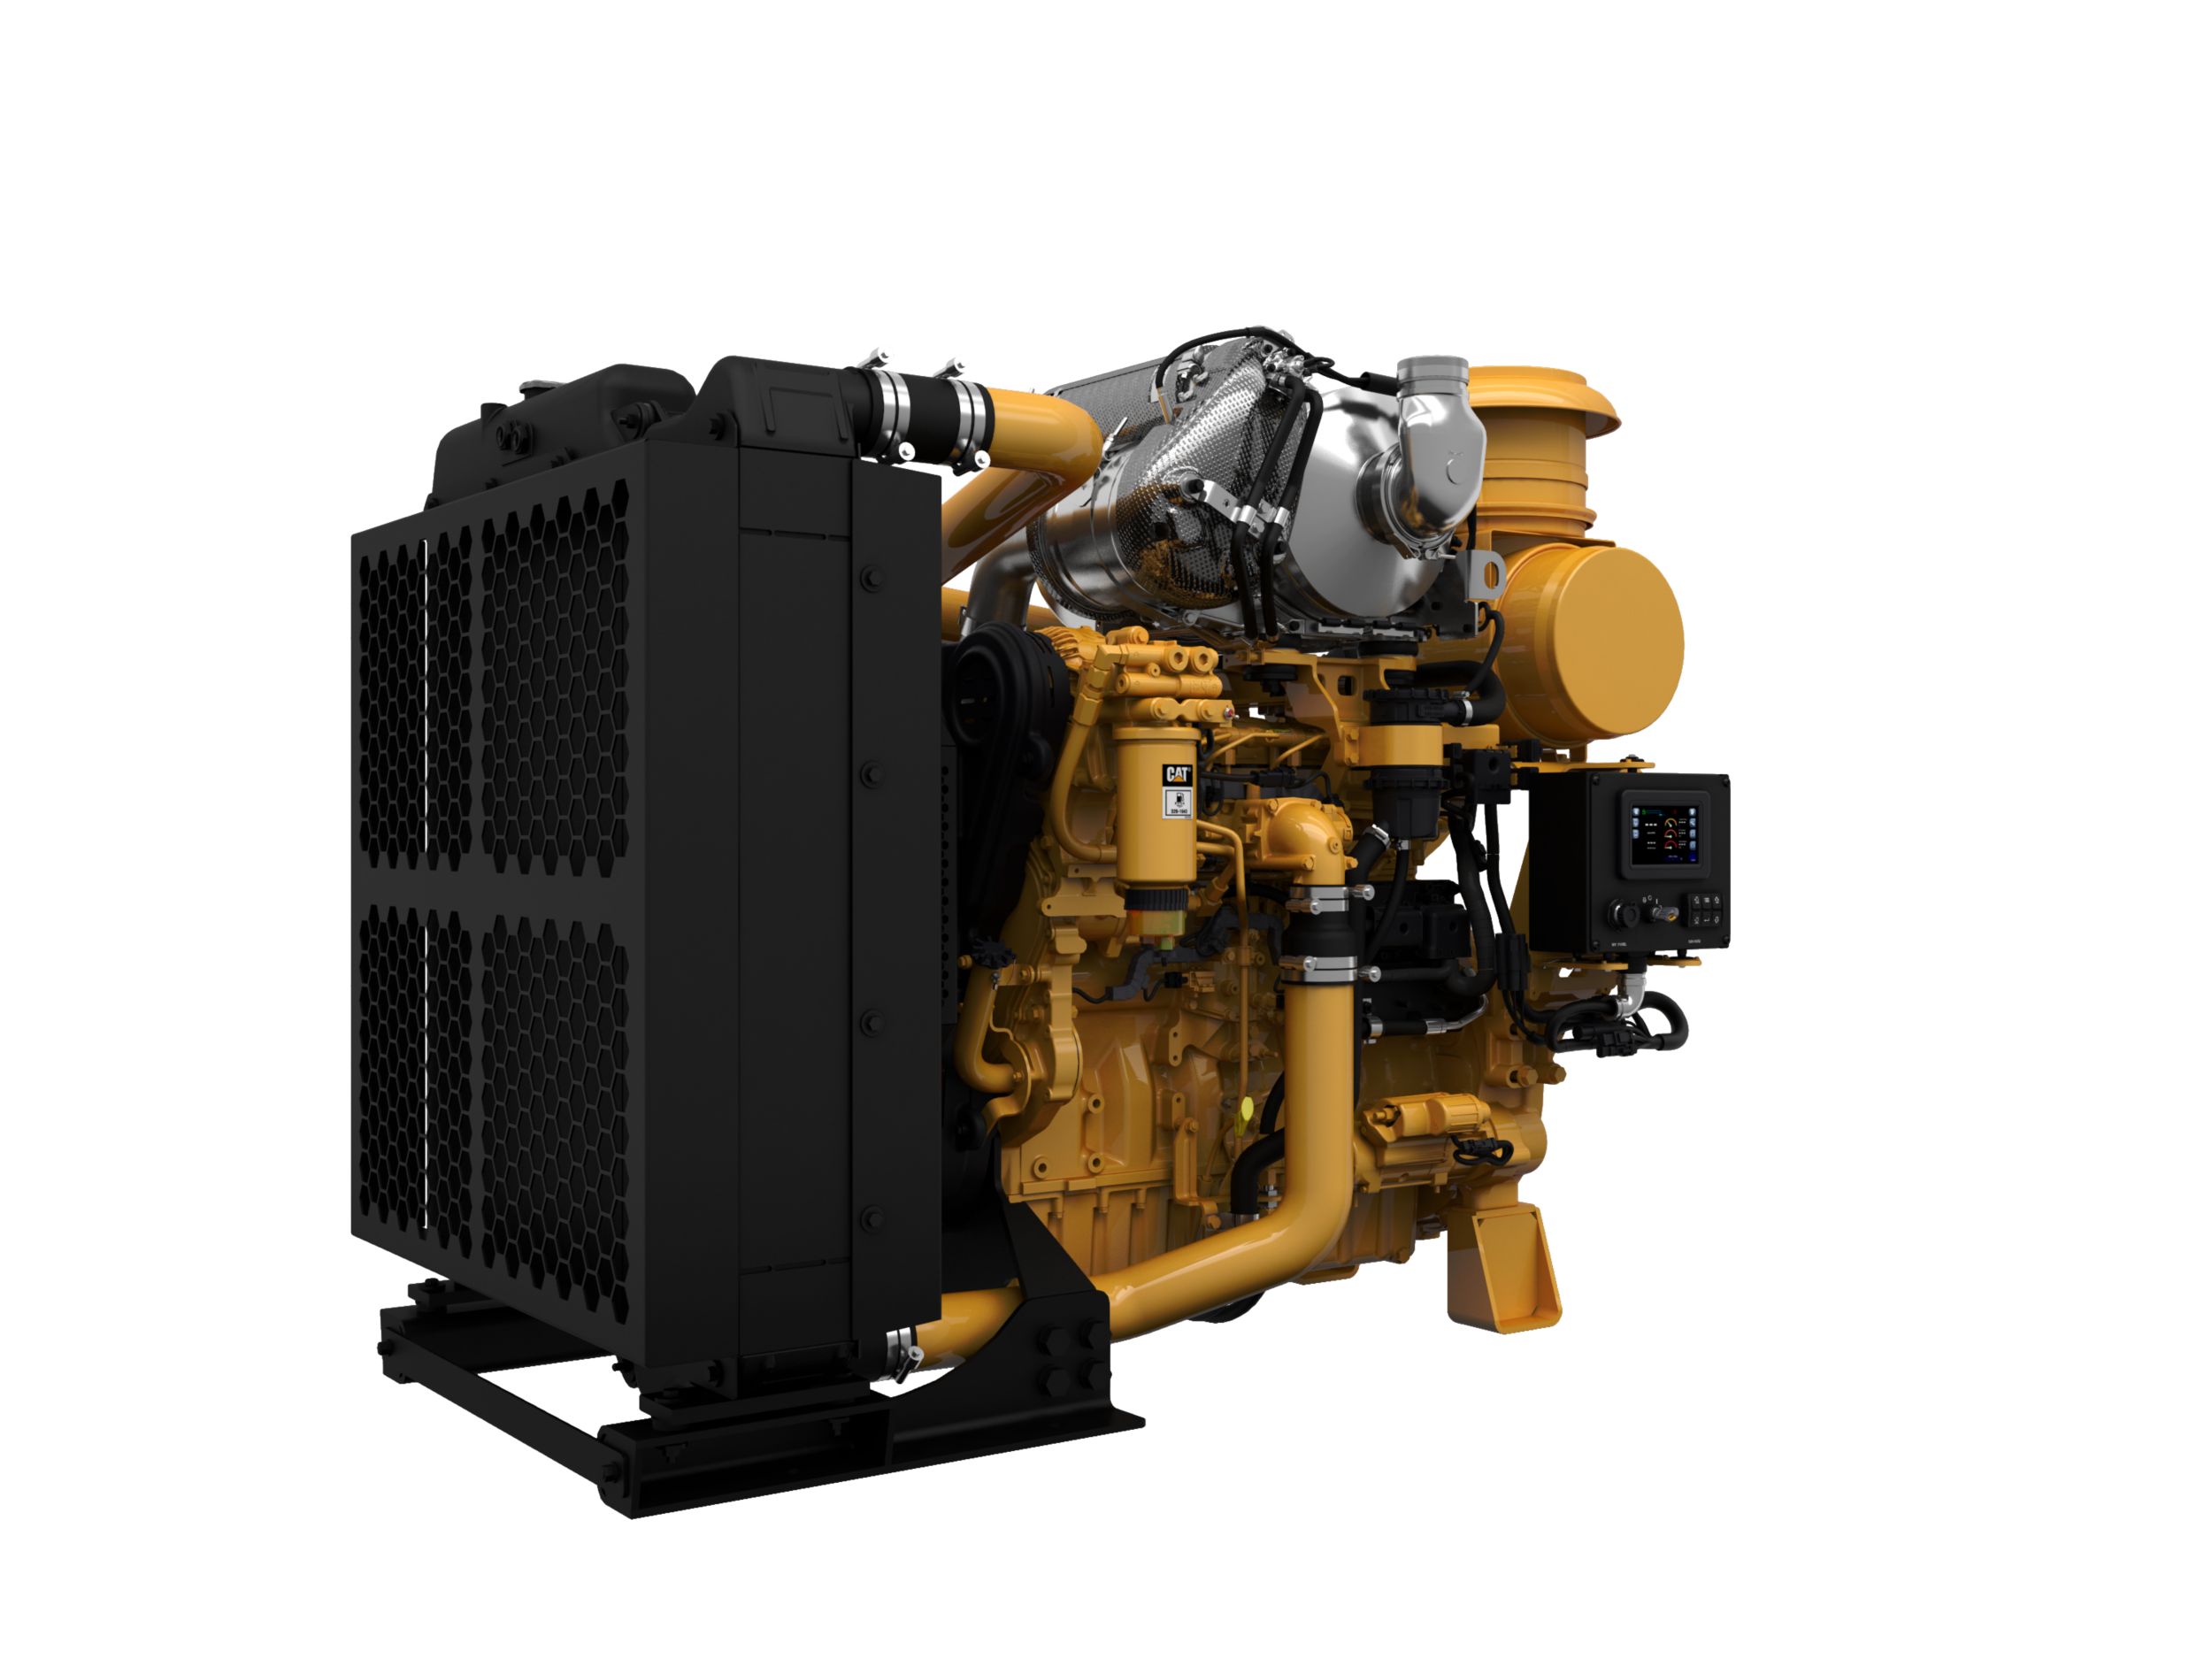 C9.3B Industrial Power Unit Diesel Power Units - Highly Regulated>